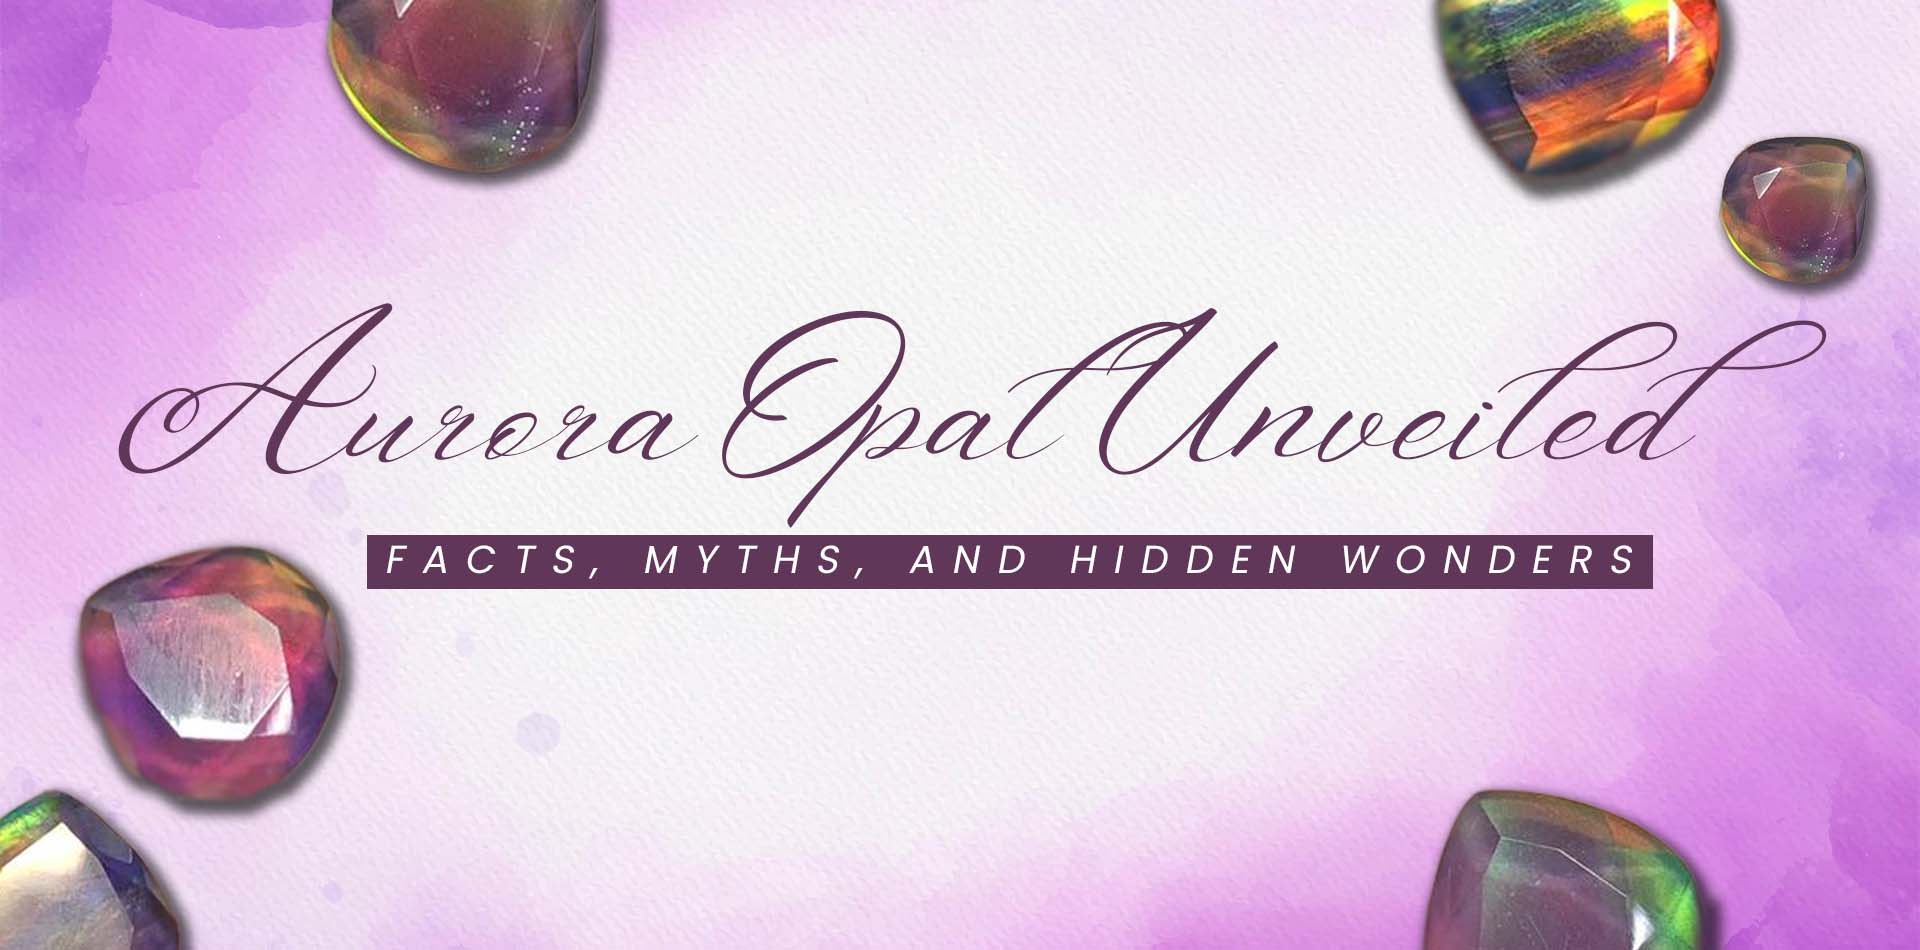 Aurora Opal Unveiled: Facts, Myths, and Hidden Wonders